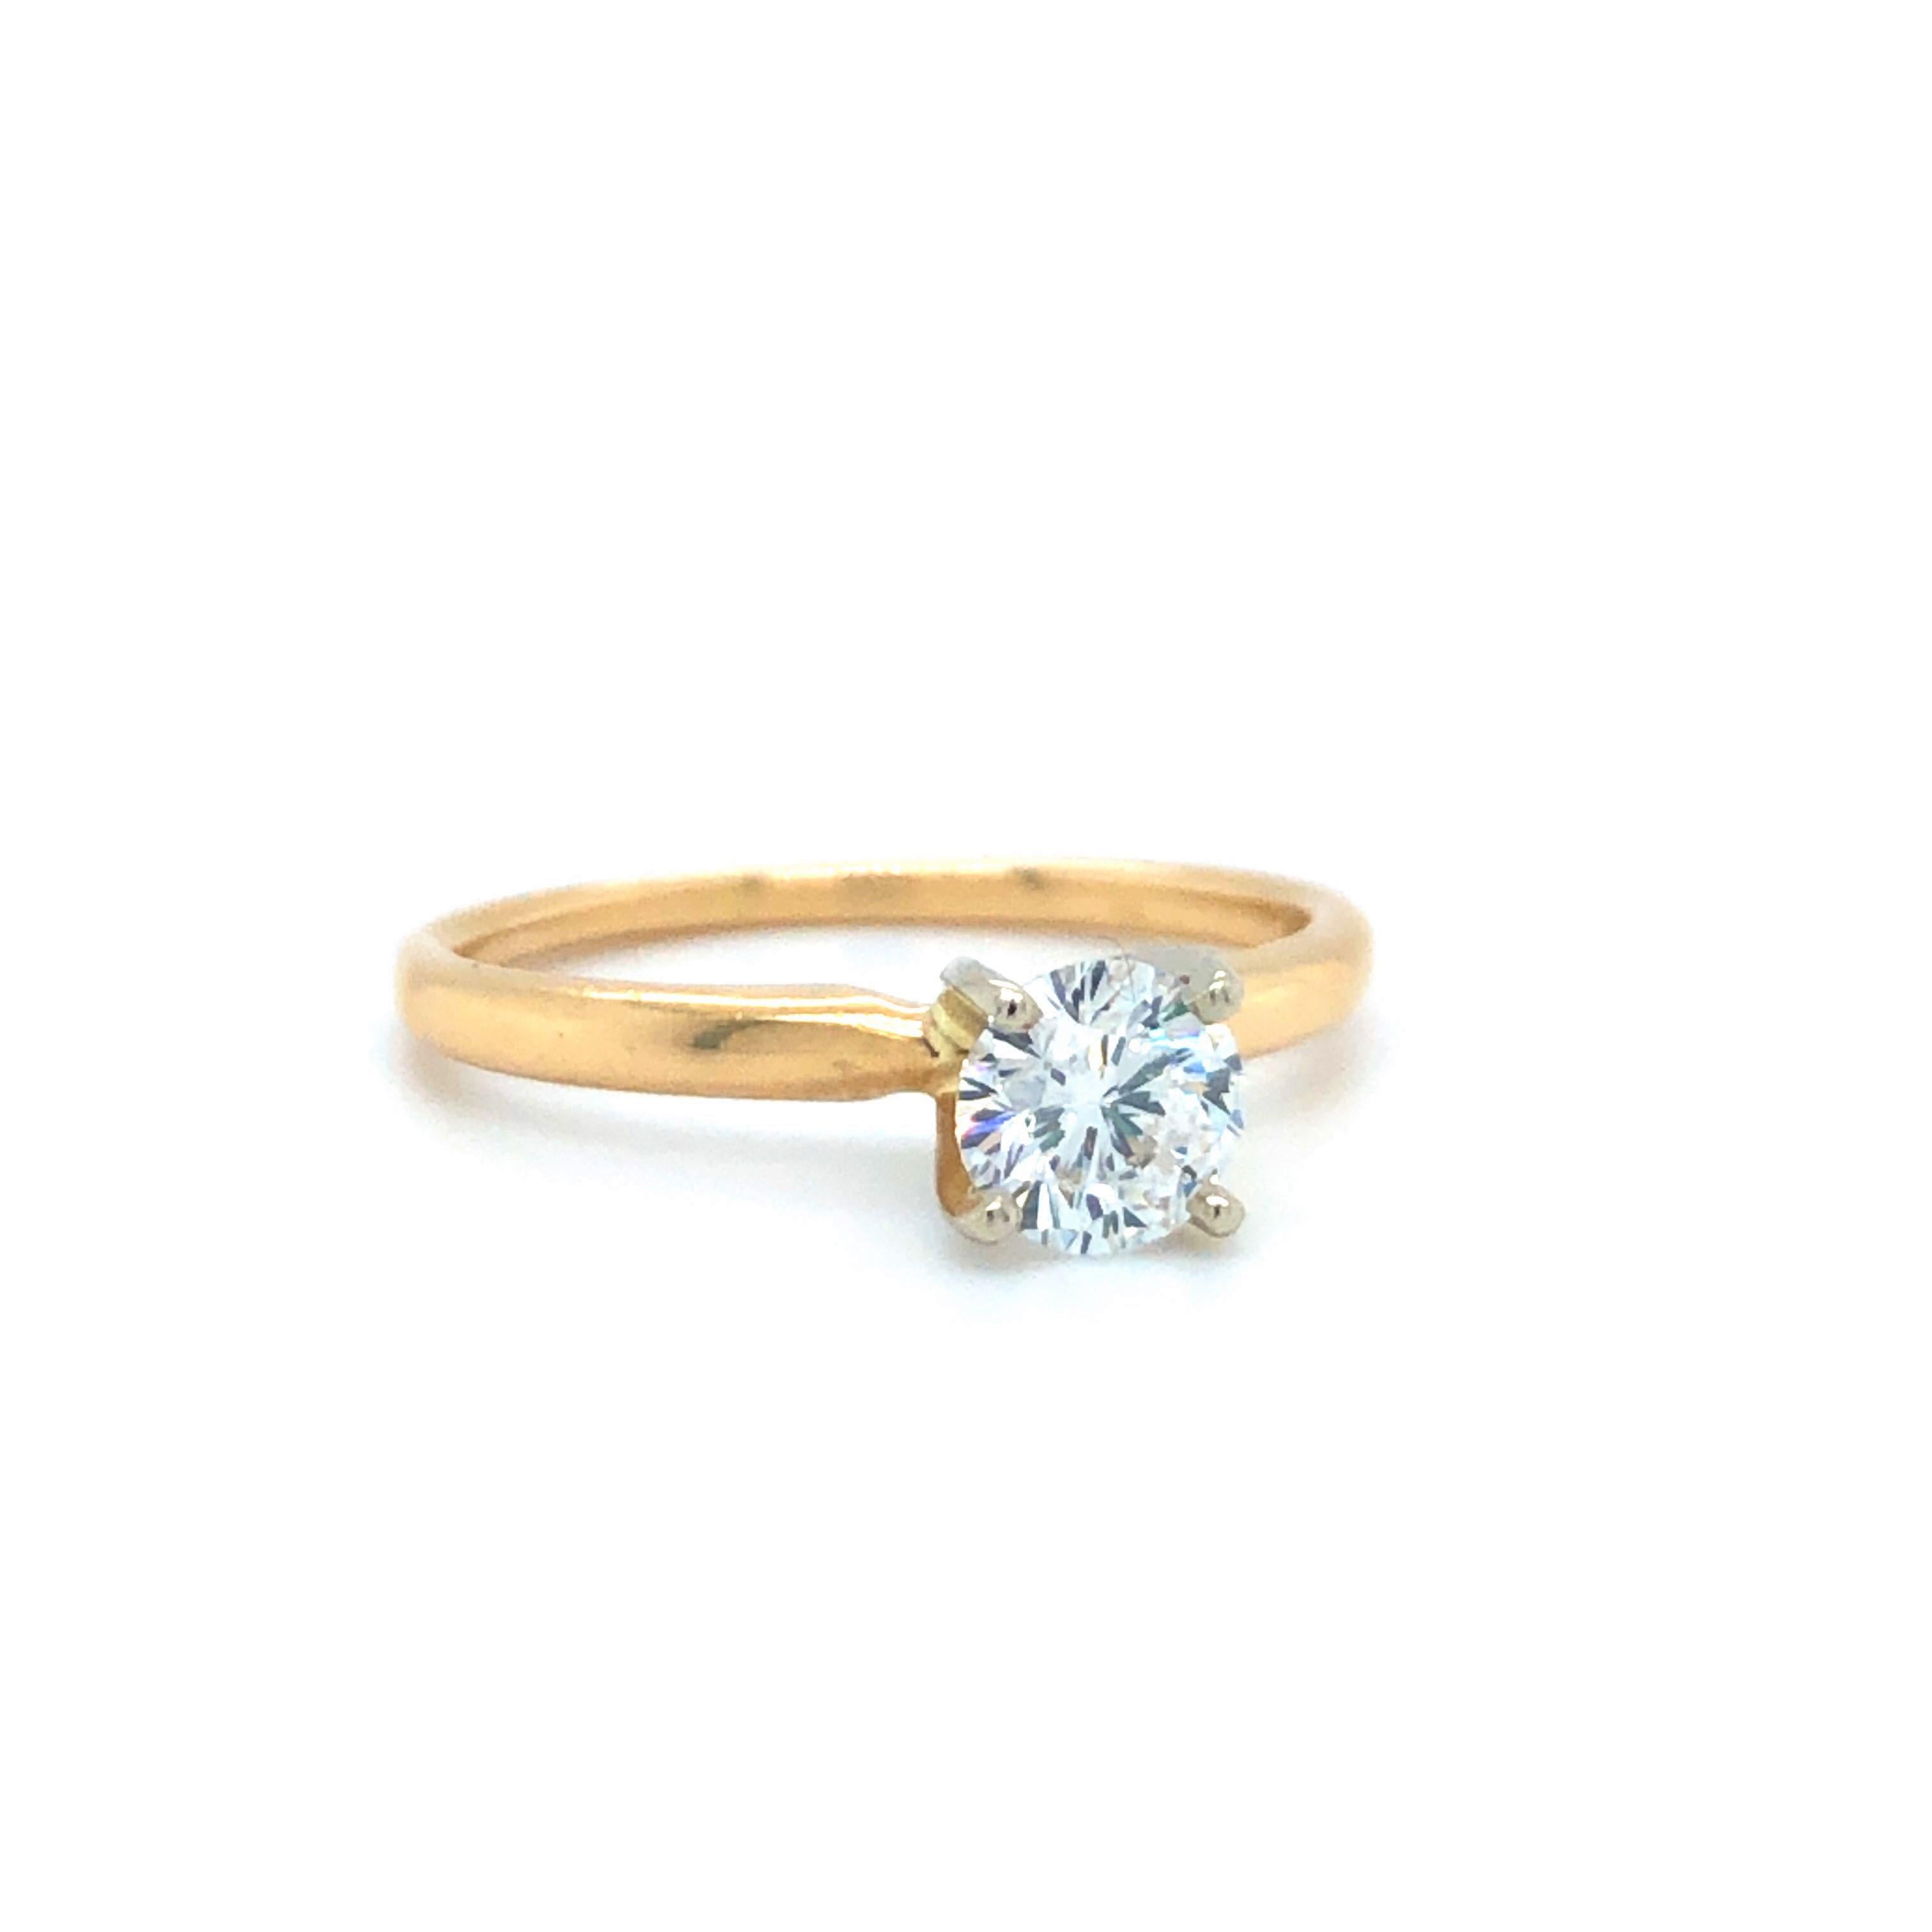 Leo 14k Yellow Gold .62ct Diamond Solitaire Engagement Ring Size 7 IGI Cert

Condition:  Excellent Condition, Professionally Cleaned and Polished
Metal:  14k Gold (Marked, and Professionally Tested)
Diamond:  Round Brilliant Diamond .62ct
Diamond